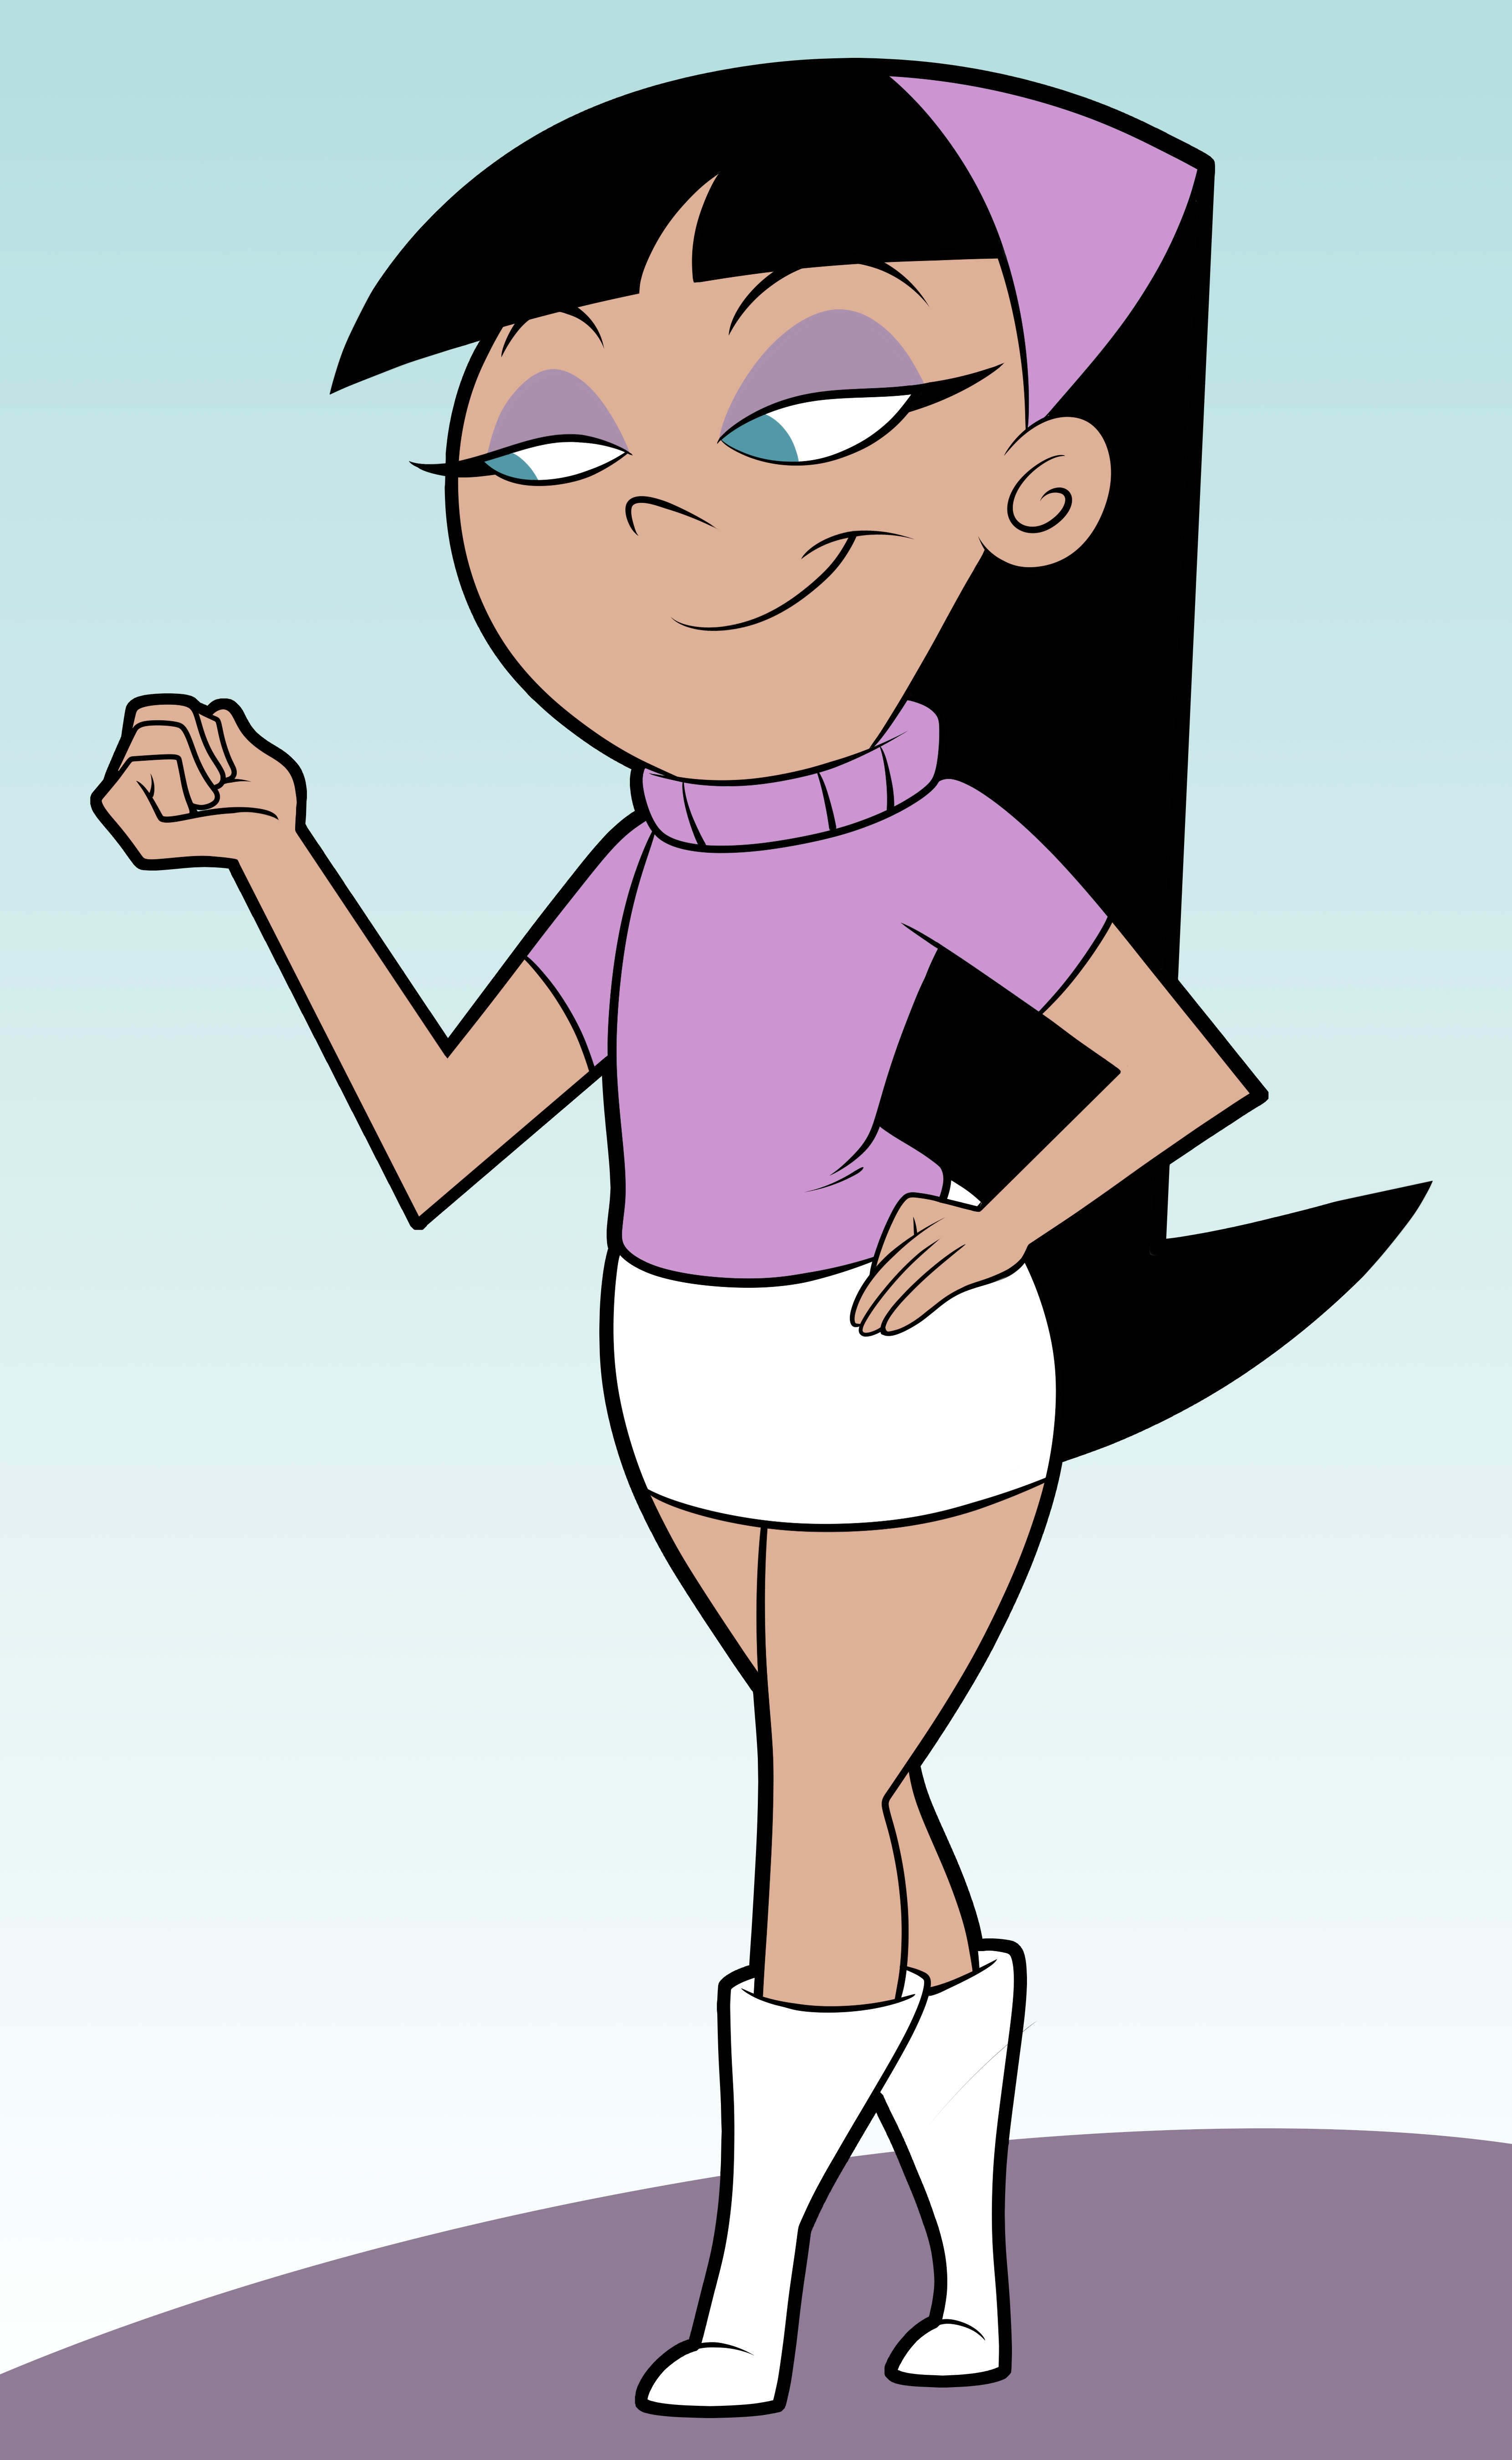 trixie_tang_by_chadrocco_ddbh8sr.png.